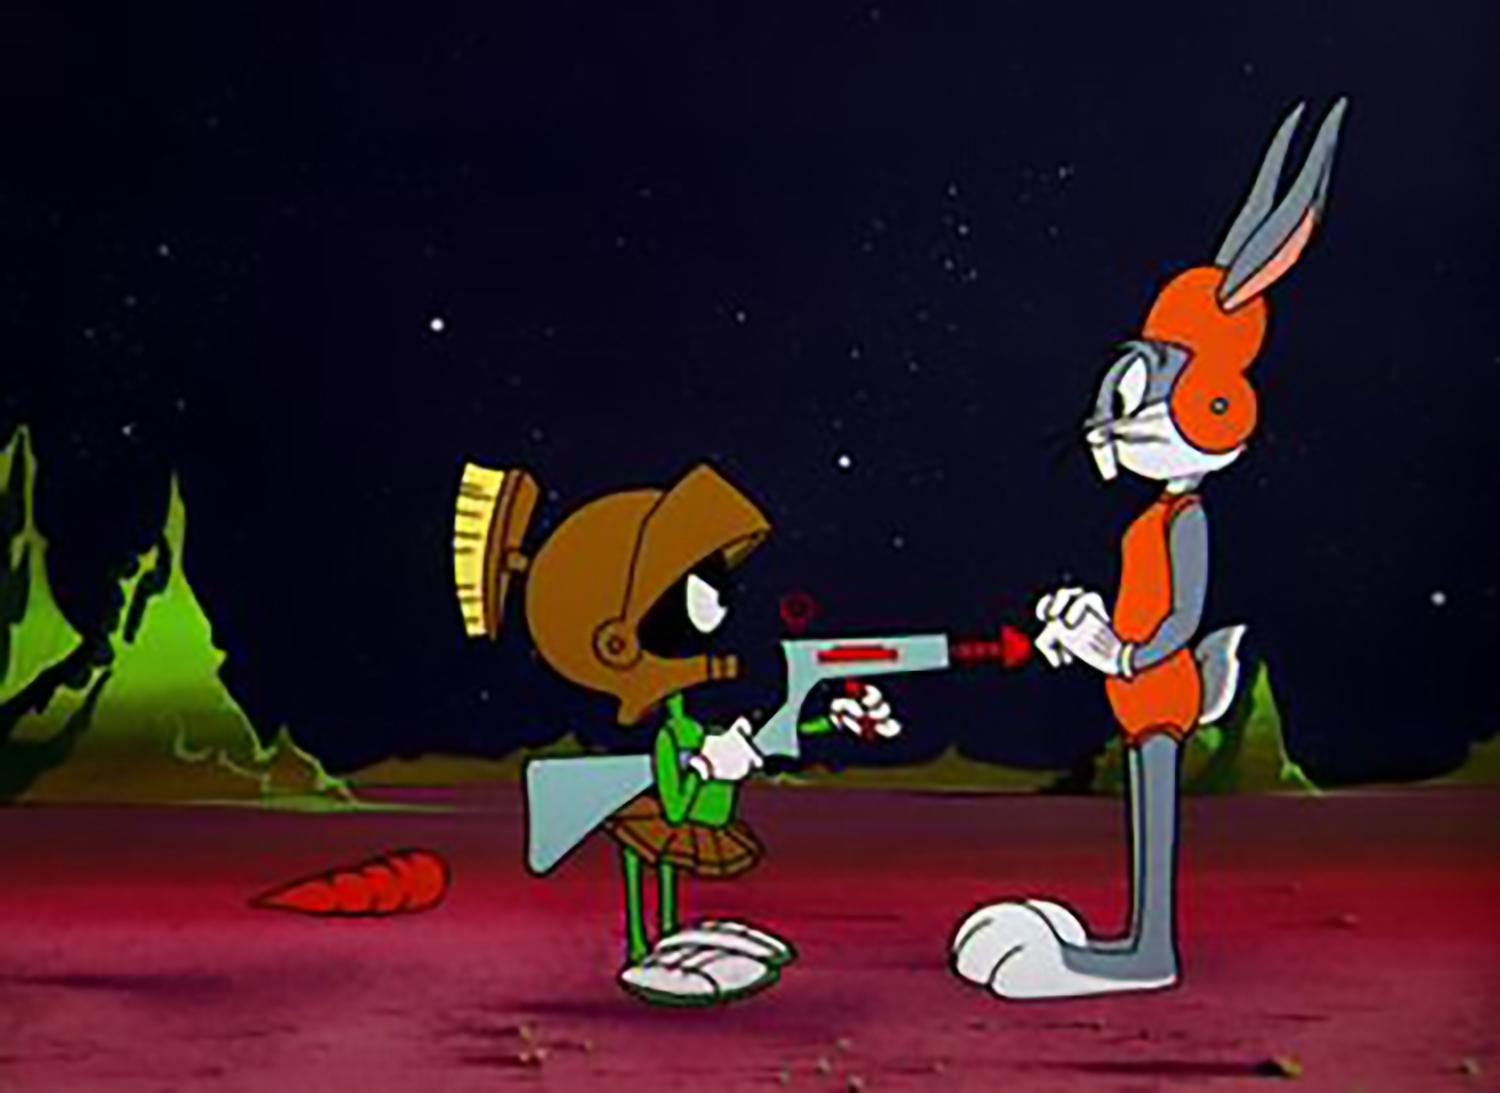 Marvin the Martian points a raygun at Bugs Bunny while they are standing on the surface of Mars.